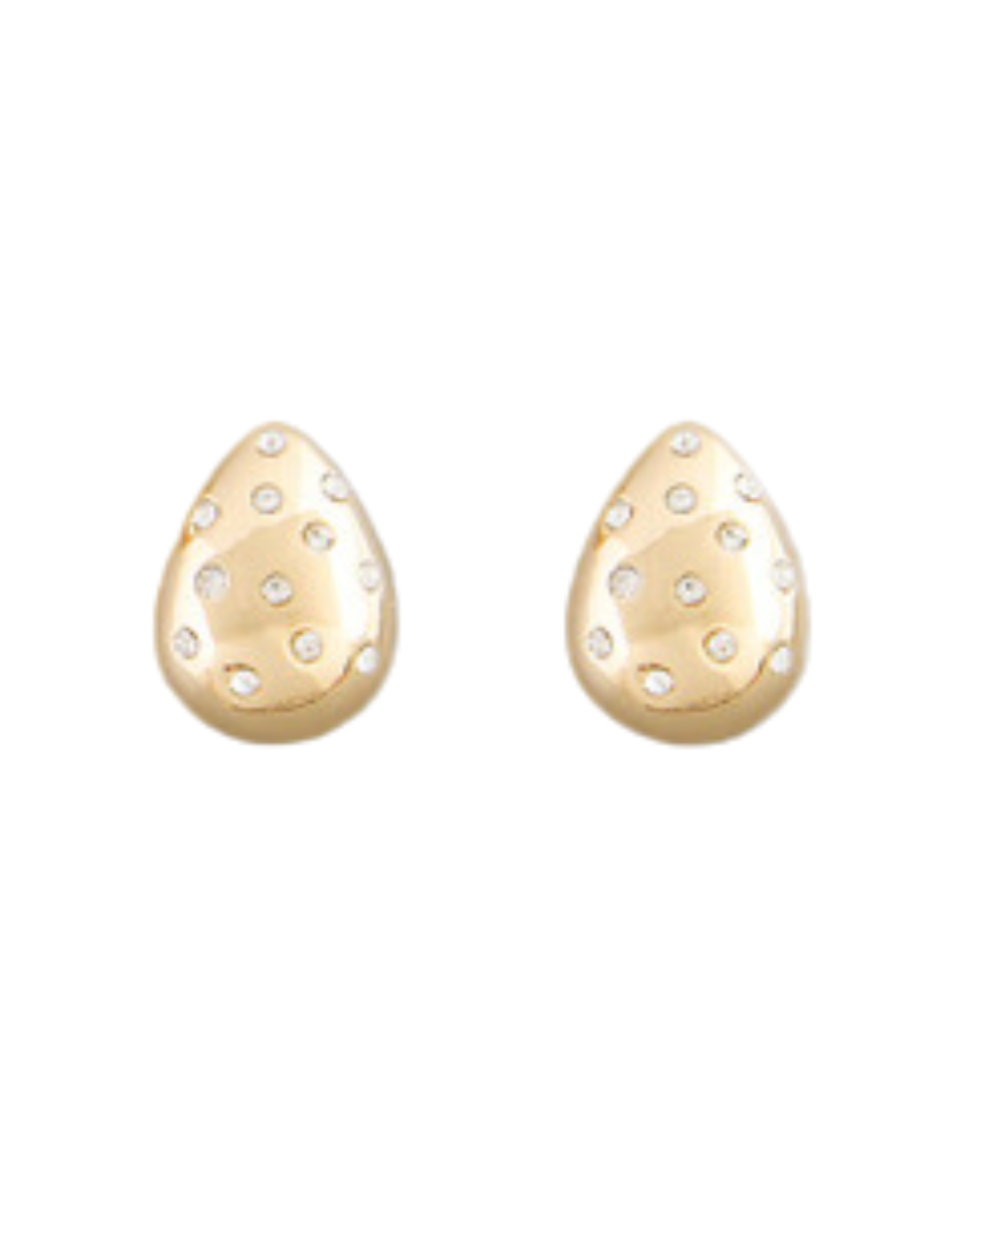 Gold Cloud Earrings with Small Rhinestones